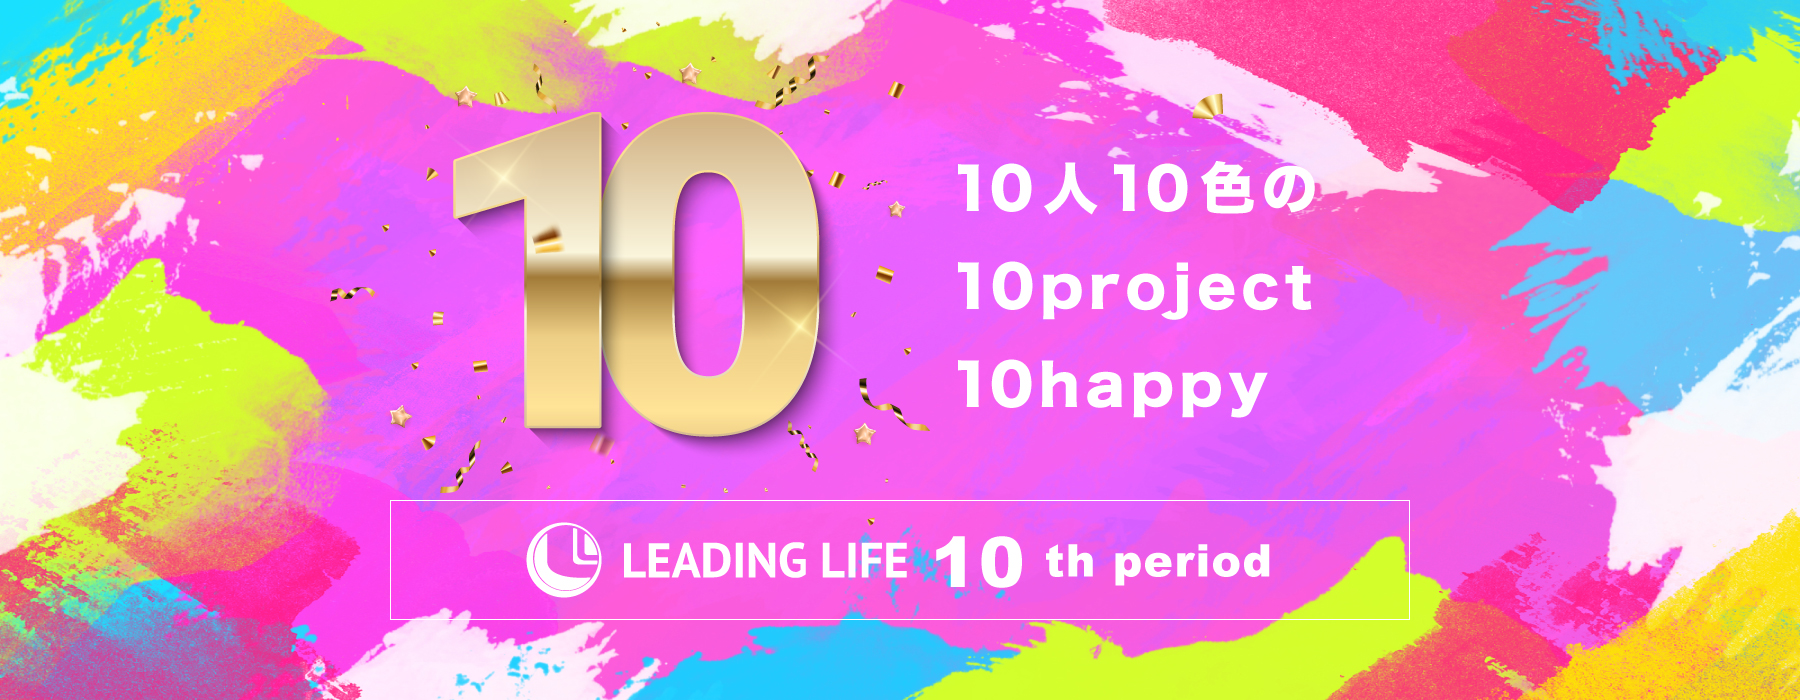 LEADING LIFE 10th period 10人10色の10project10happy